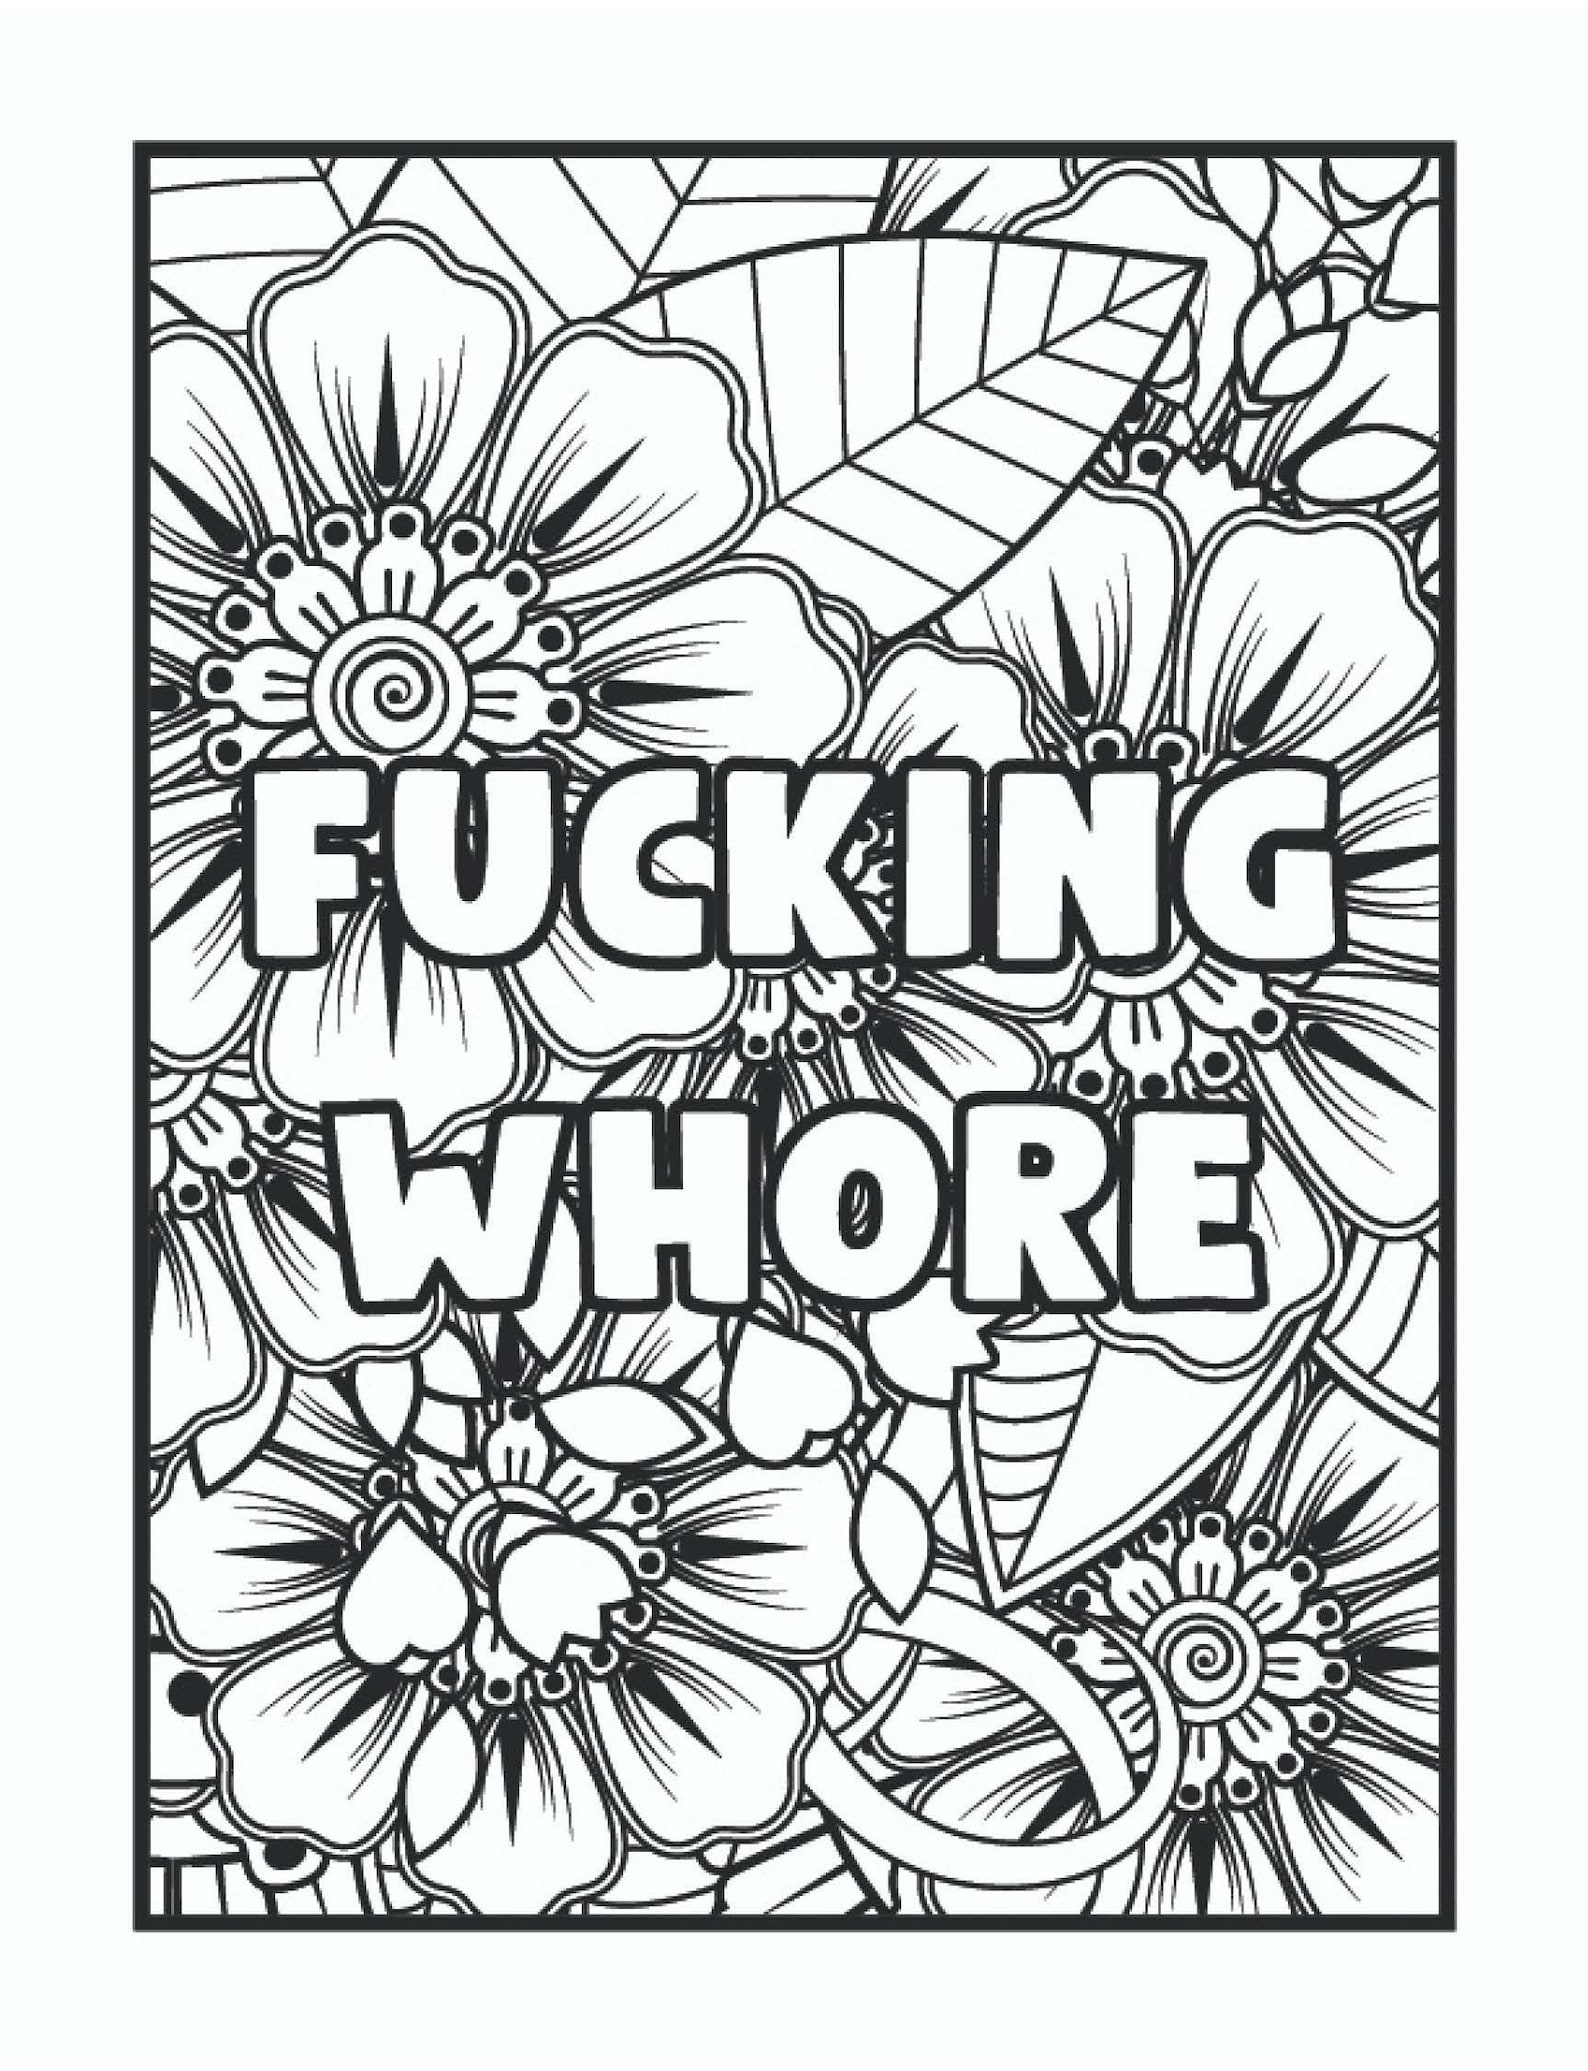 41 Naughty and Funny Cursing Coloring Pages for Adults - Etsy